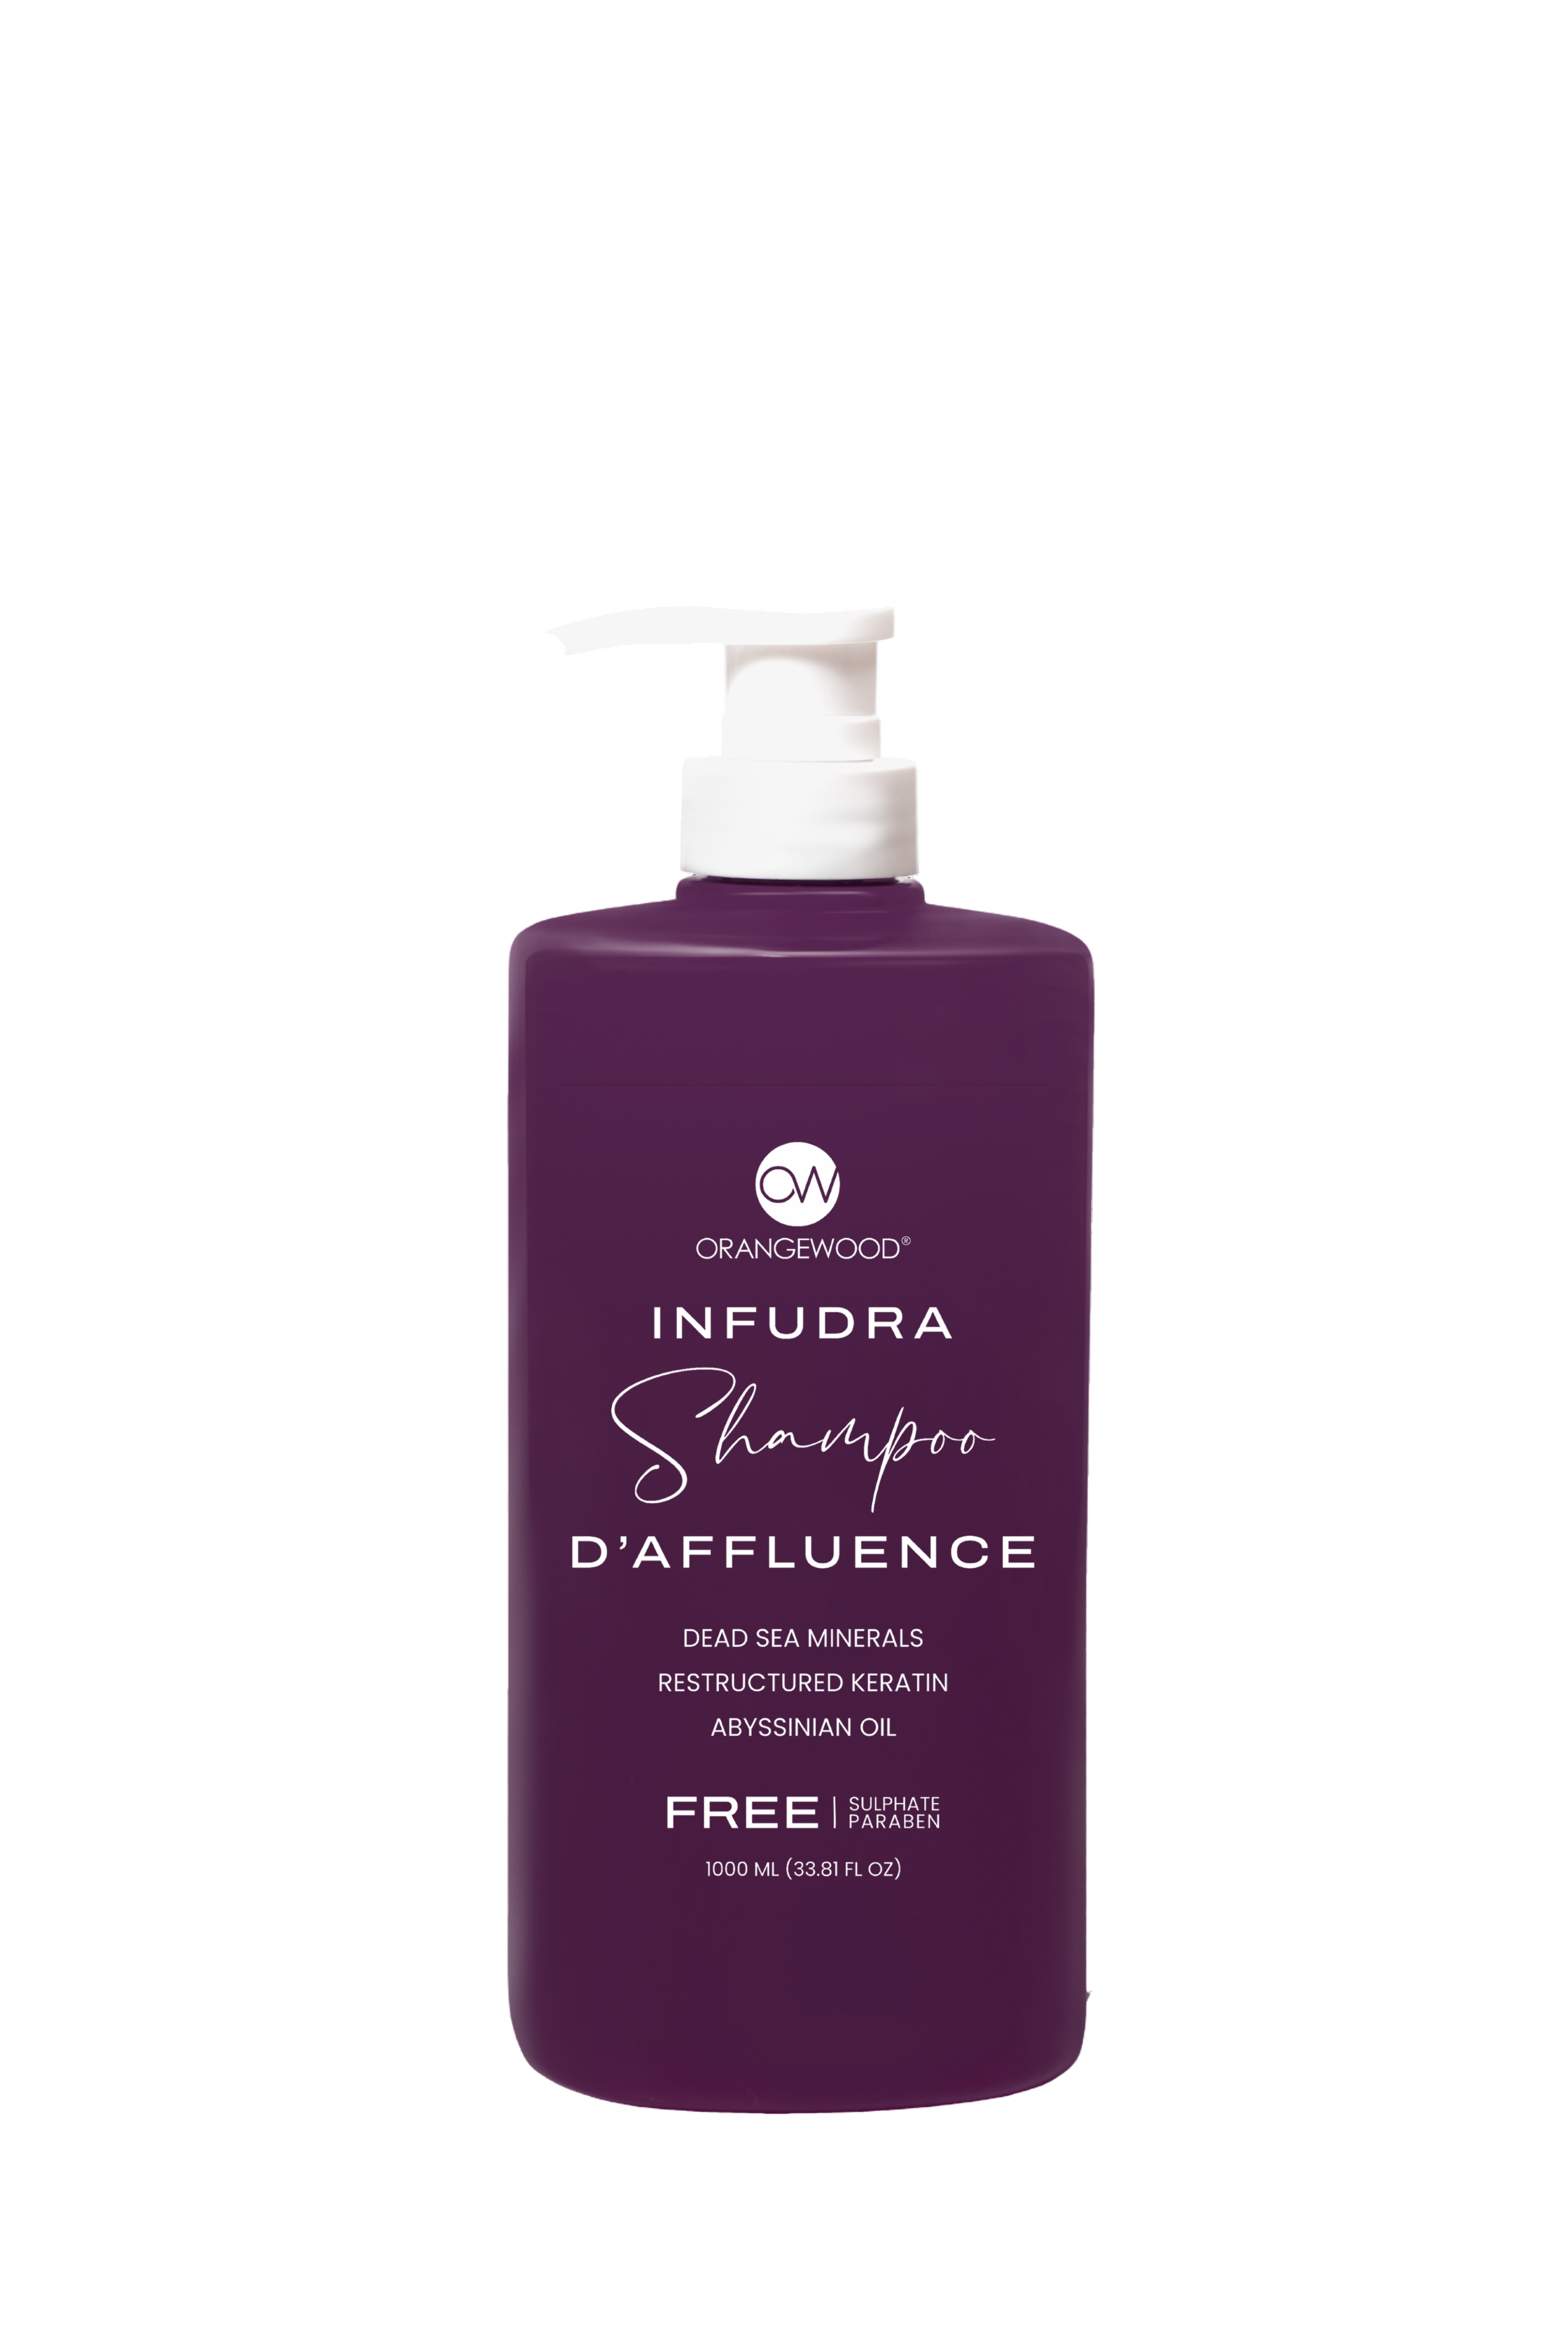 INFUDRA D'Affluence Shampoo Orangewood Sulphate & Paraben Free (Imported) For Men and Women 1000ML